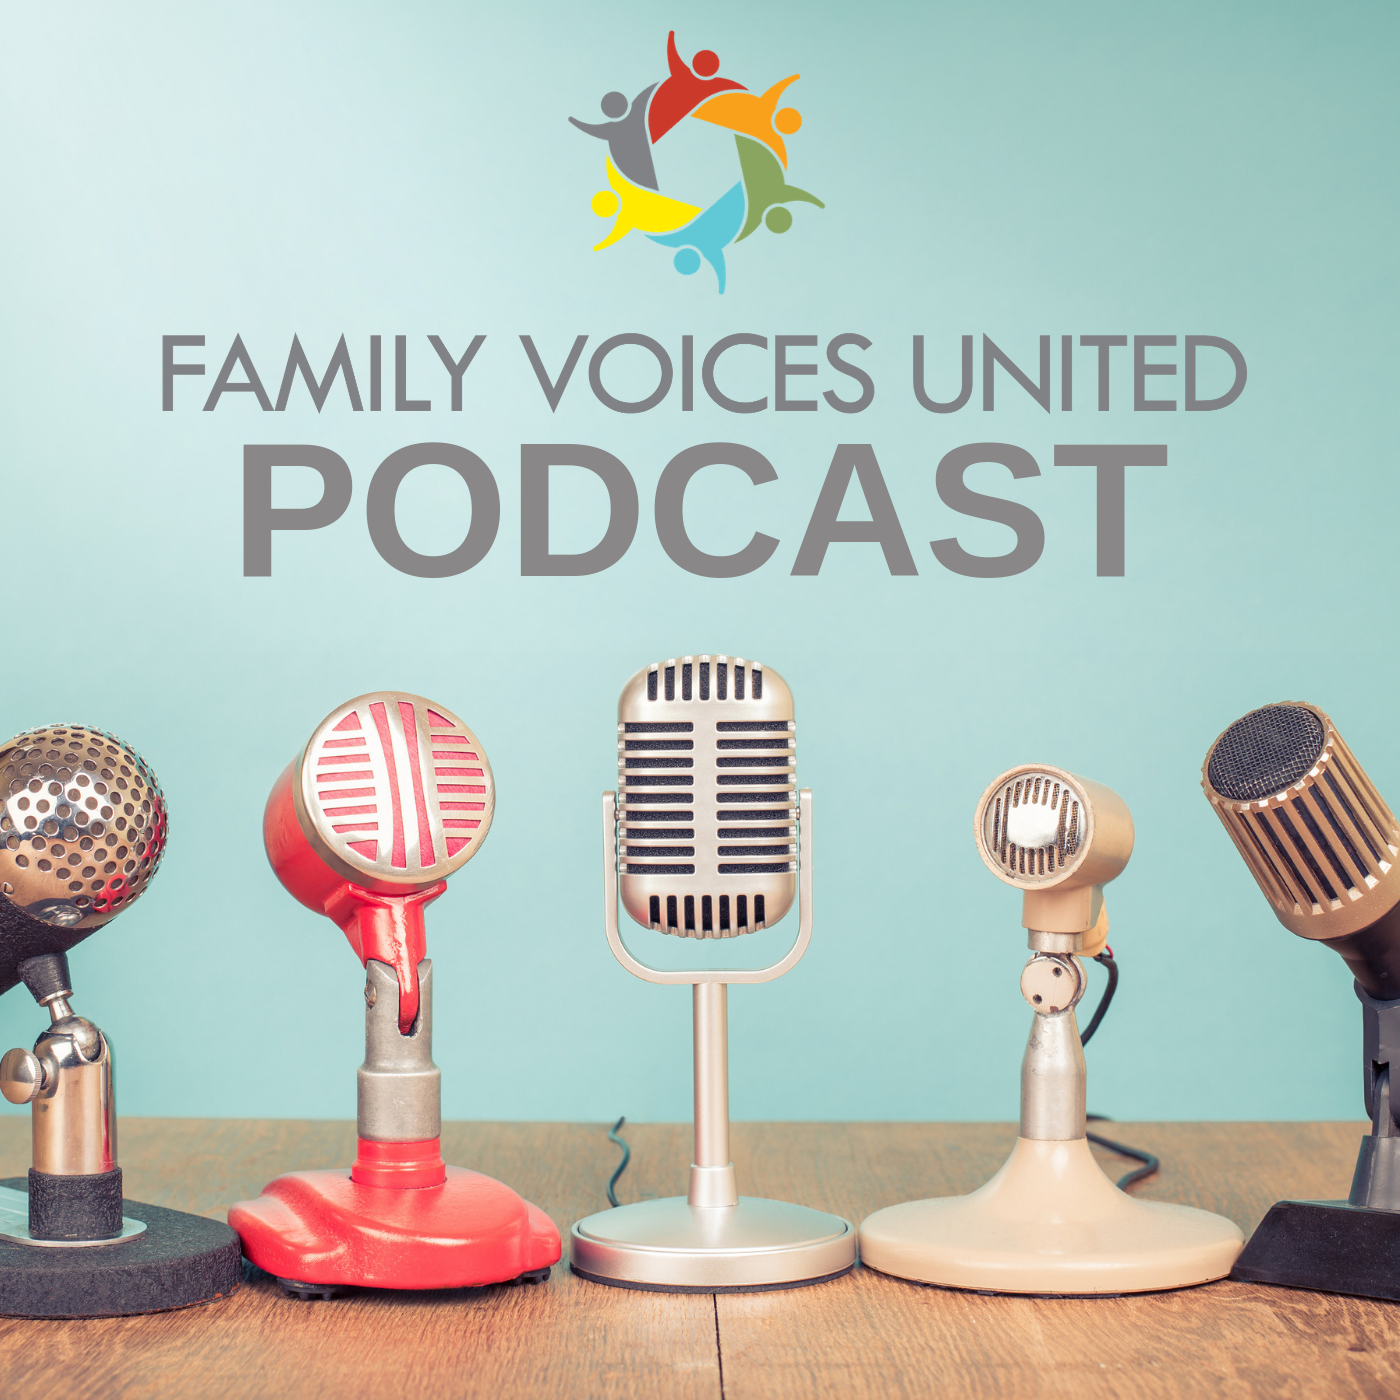 image shows cluster of microphones and text reads Family Voices United Podcast